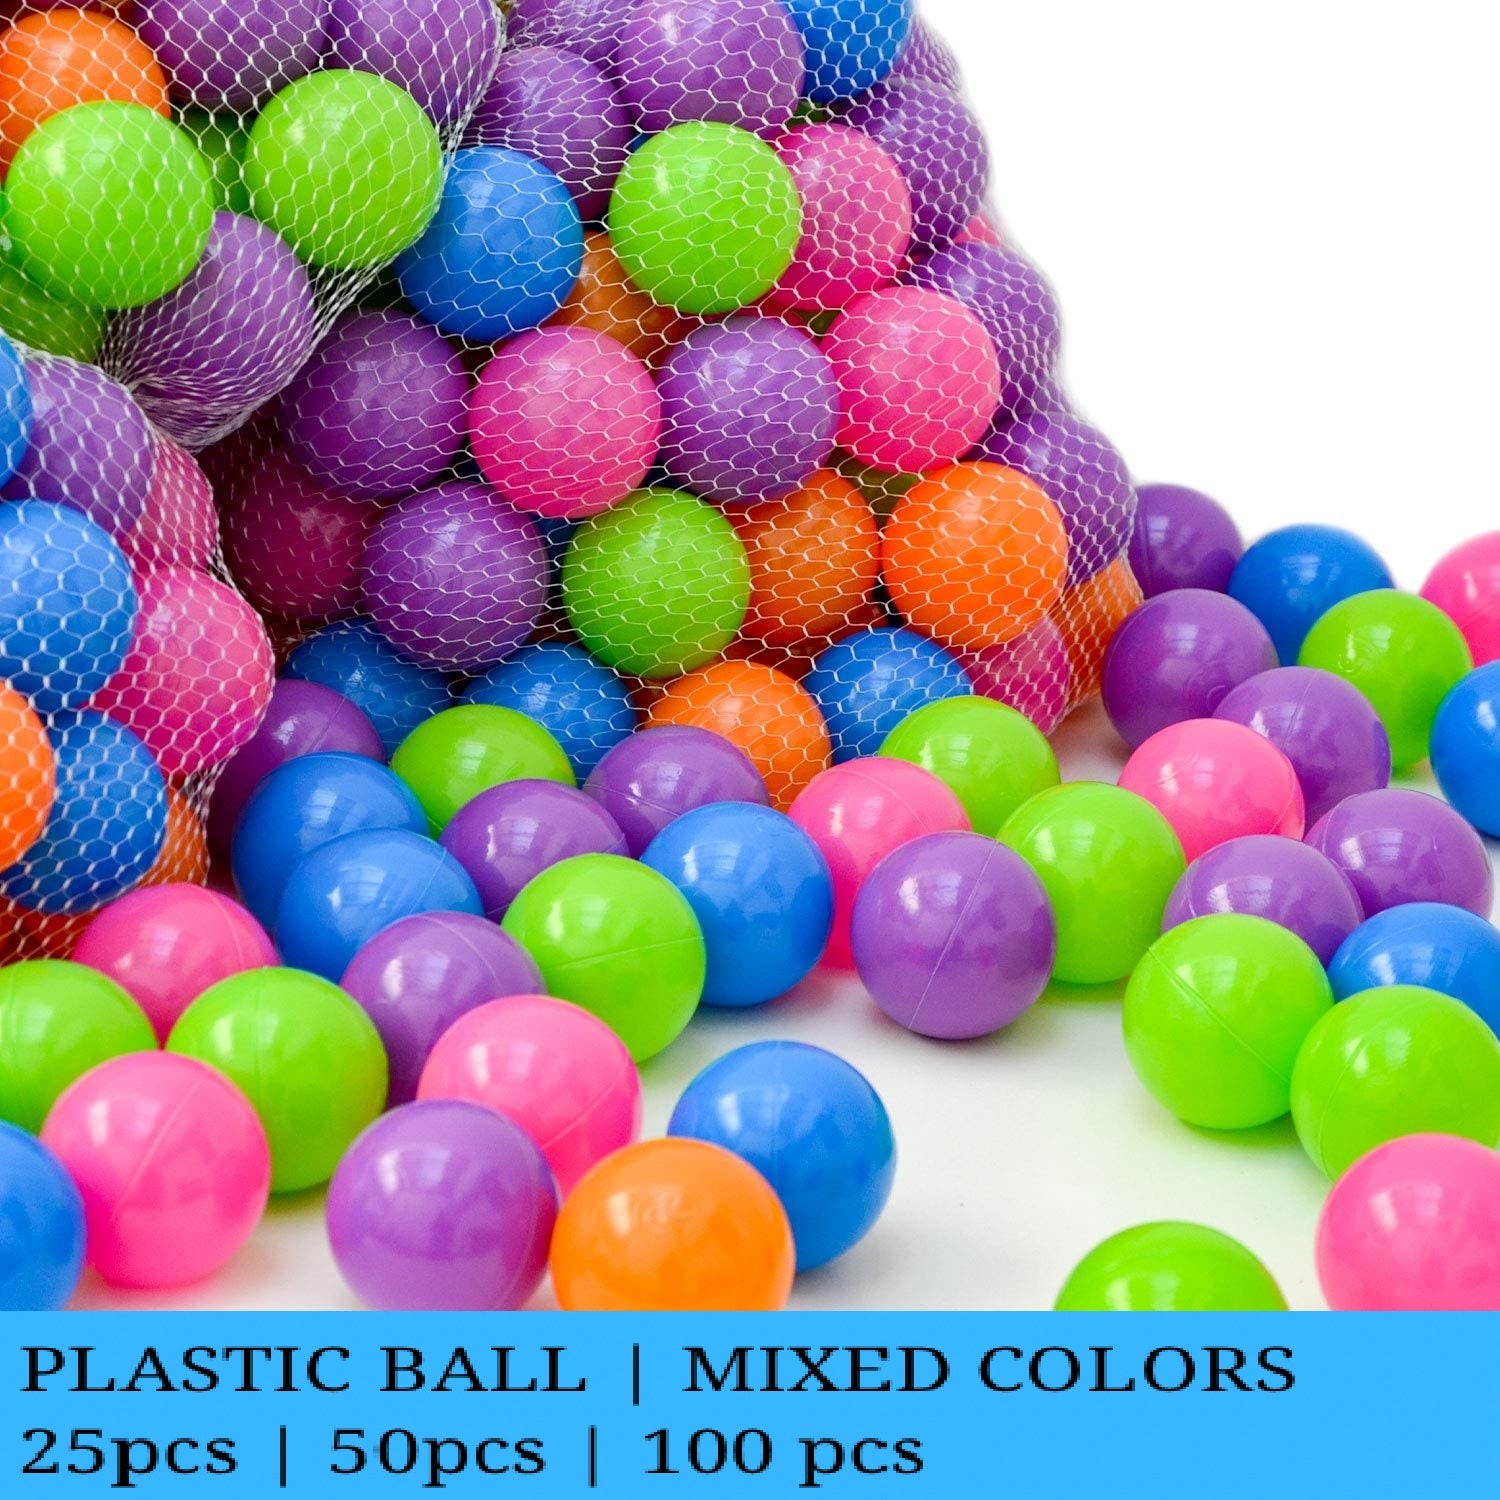 Baby Ball Set | Kids Ball | Balls Toys for Kids | Multicolored Plastic Balls | 100 Balls in 1 Pack | High Quality